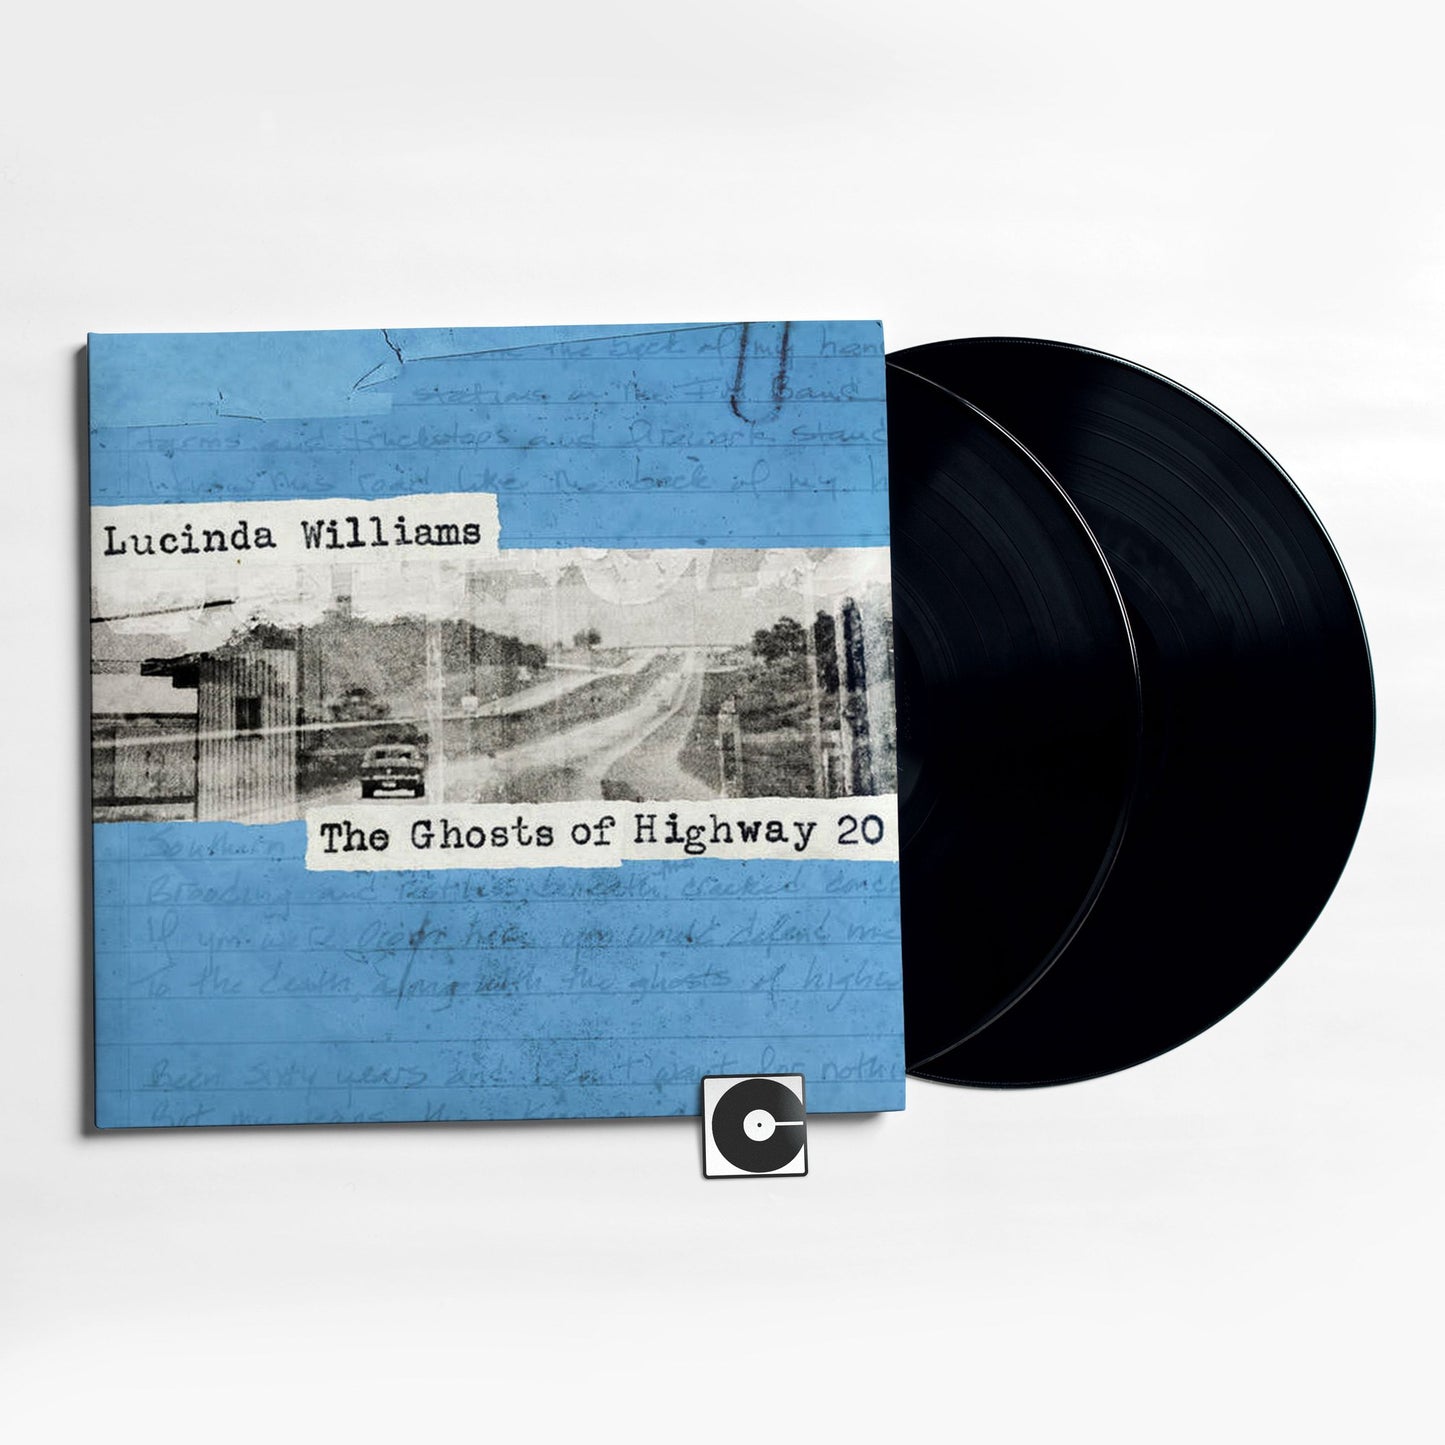 Lucinda Williams - "The Ghosts Of Highway 20"